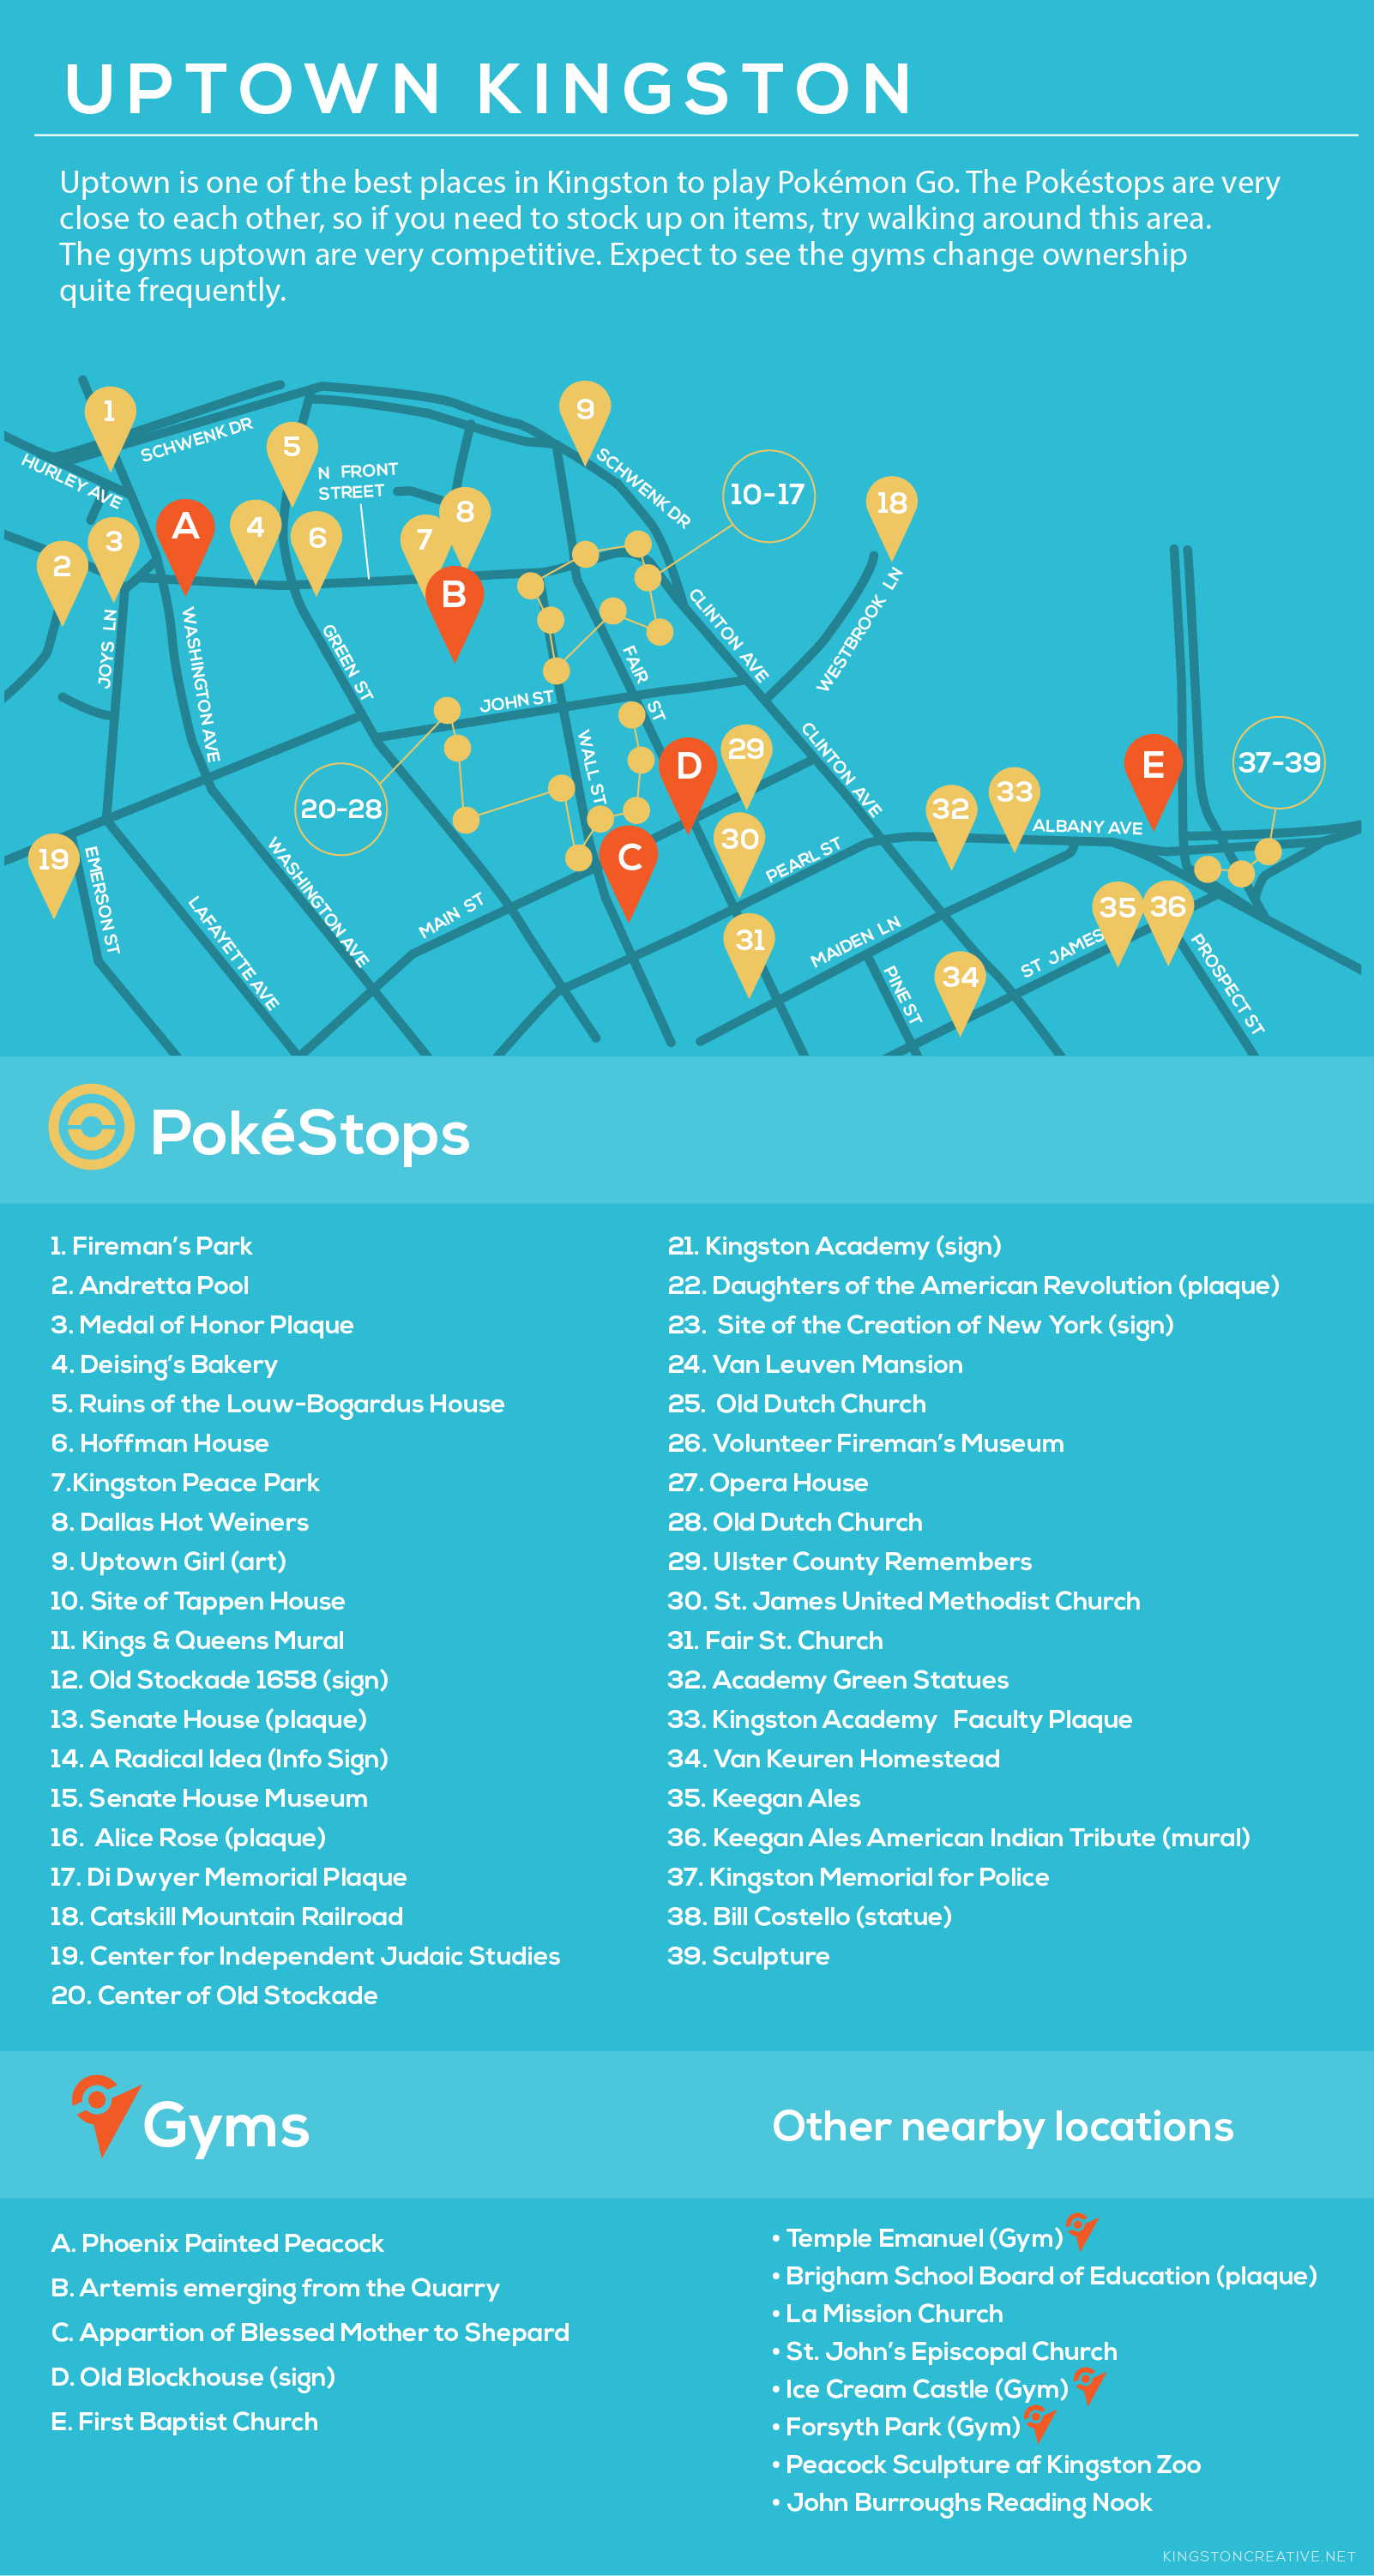 Pokemon Go websites, apps for finding Pokestops, rares, gyms and more - CNET